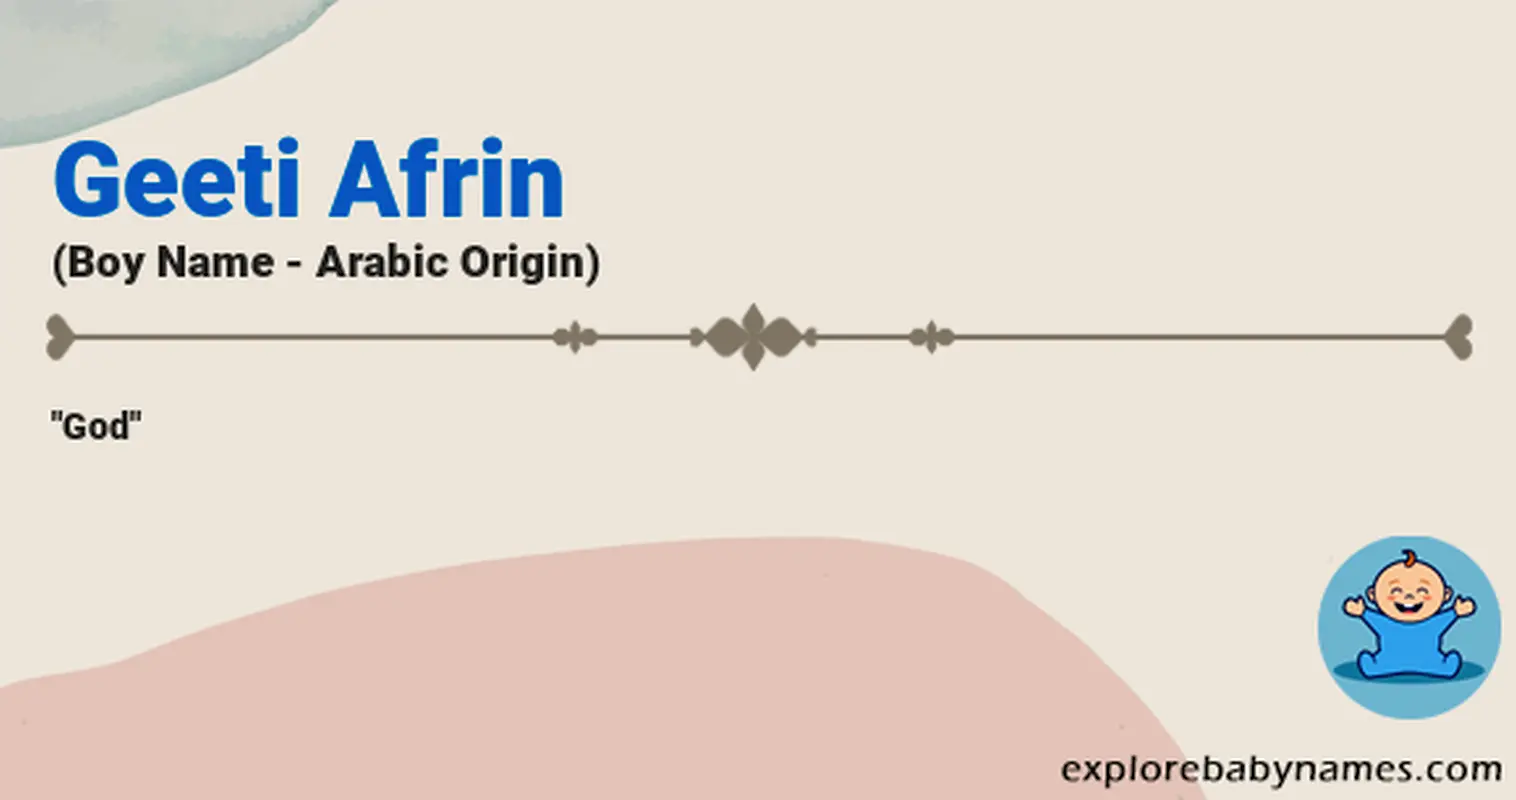 Meaning of Geeti Afrin